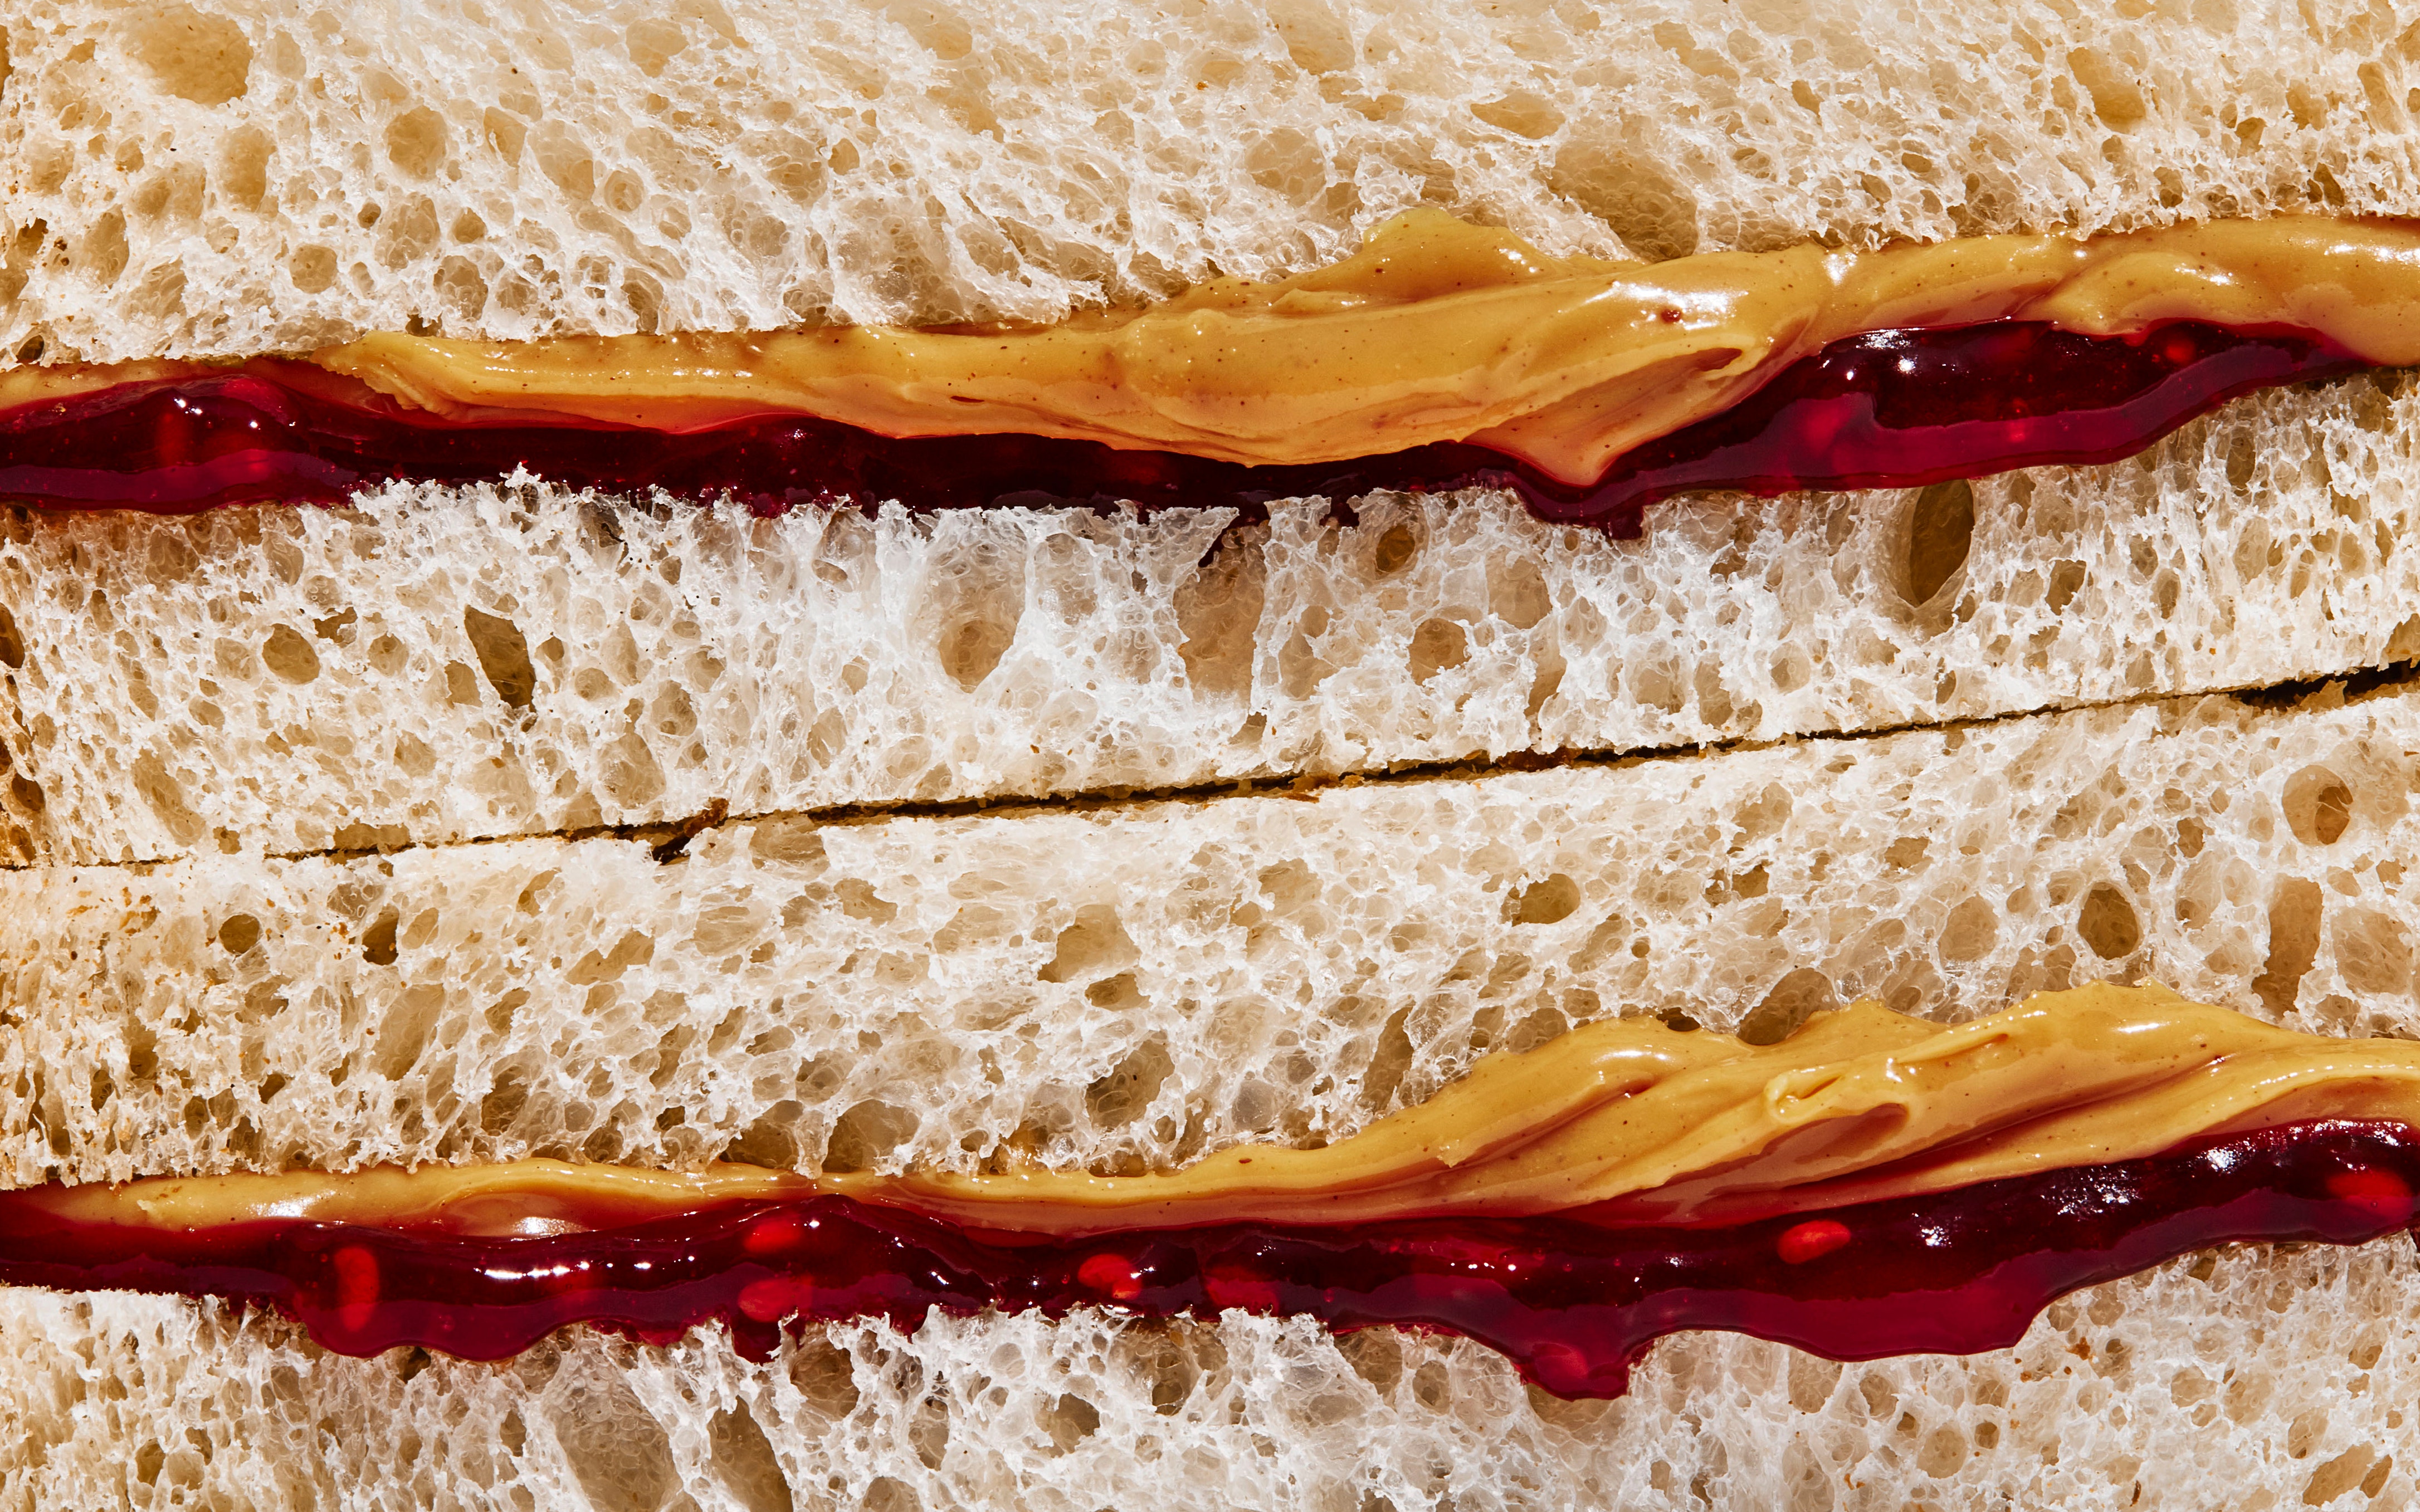 Hot Takes About the Right Way to Make a Peanut Butter and Jelly Sandwich. Bon Appétit